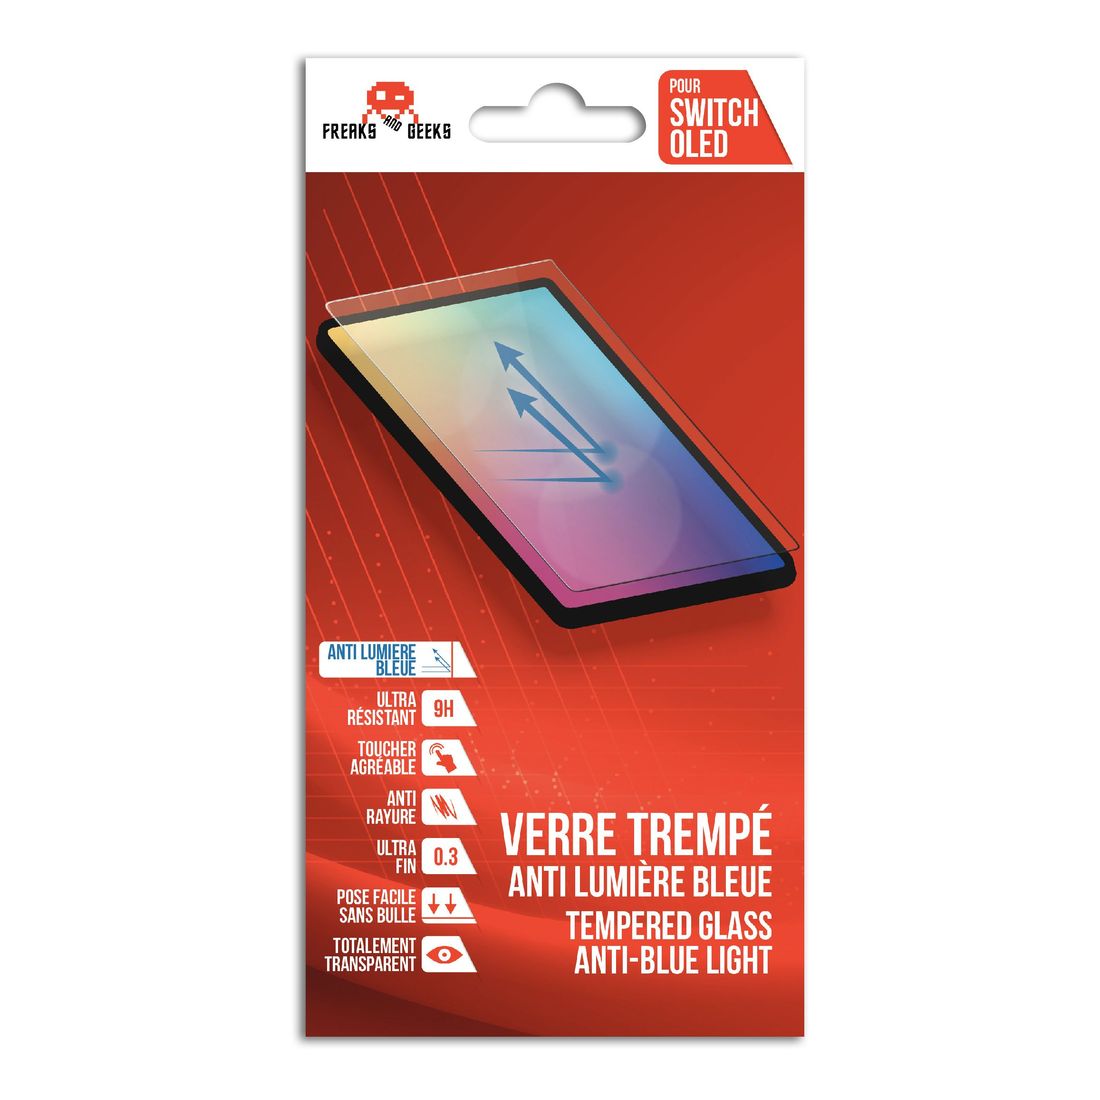 Freaks and Geeks Anti-Blue Light Tempered Glass Screen Protector for Nintendo Switch OLED